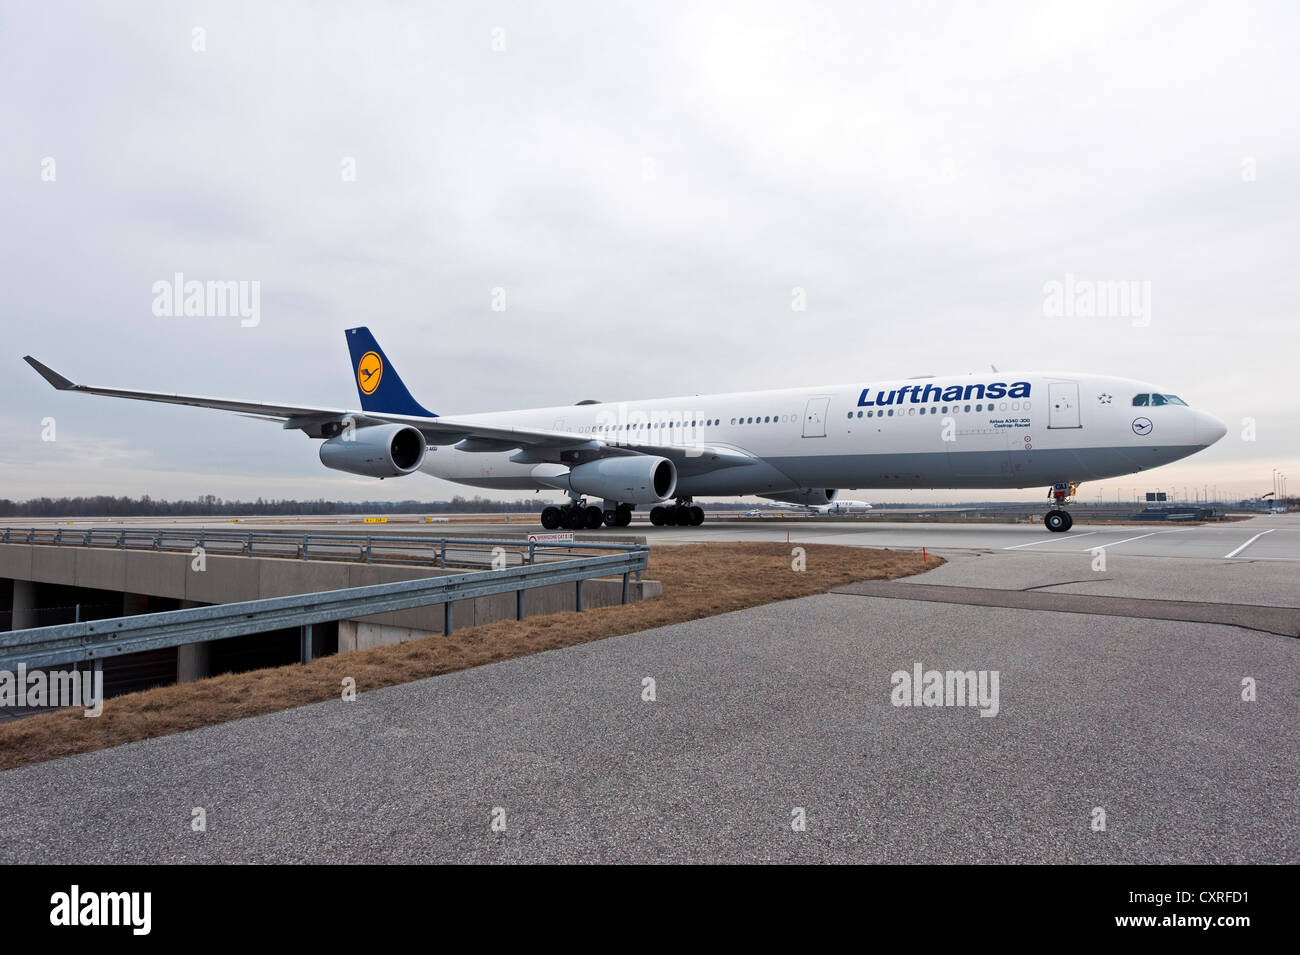 Lufthansa Airbus A340-300 airplane, with the name Castrop-Rauxel, taxiing to the runway at Munich Airport, Bavaria Stock Photo